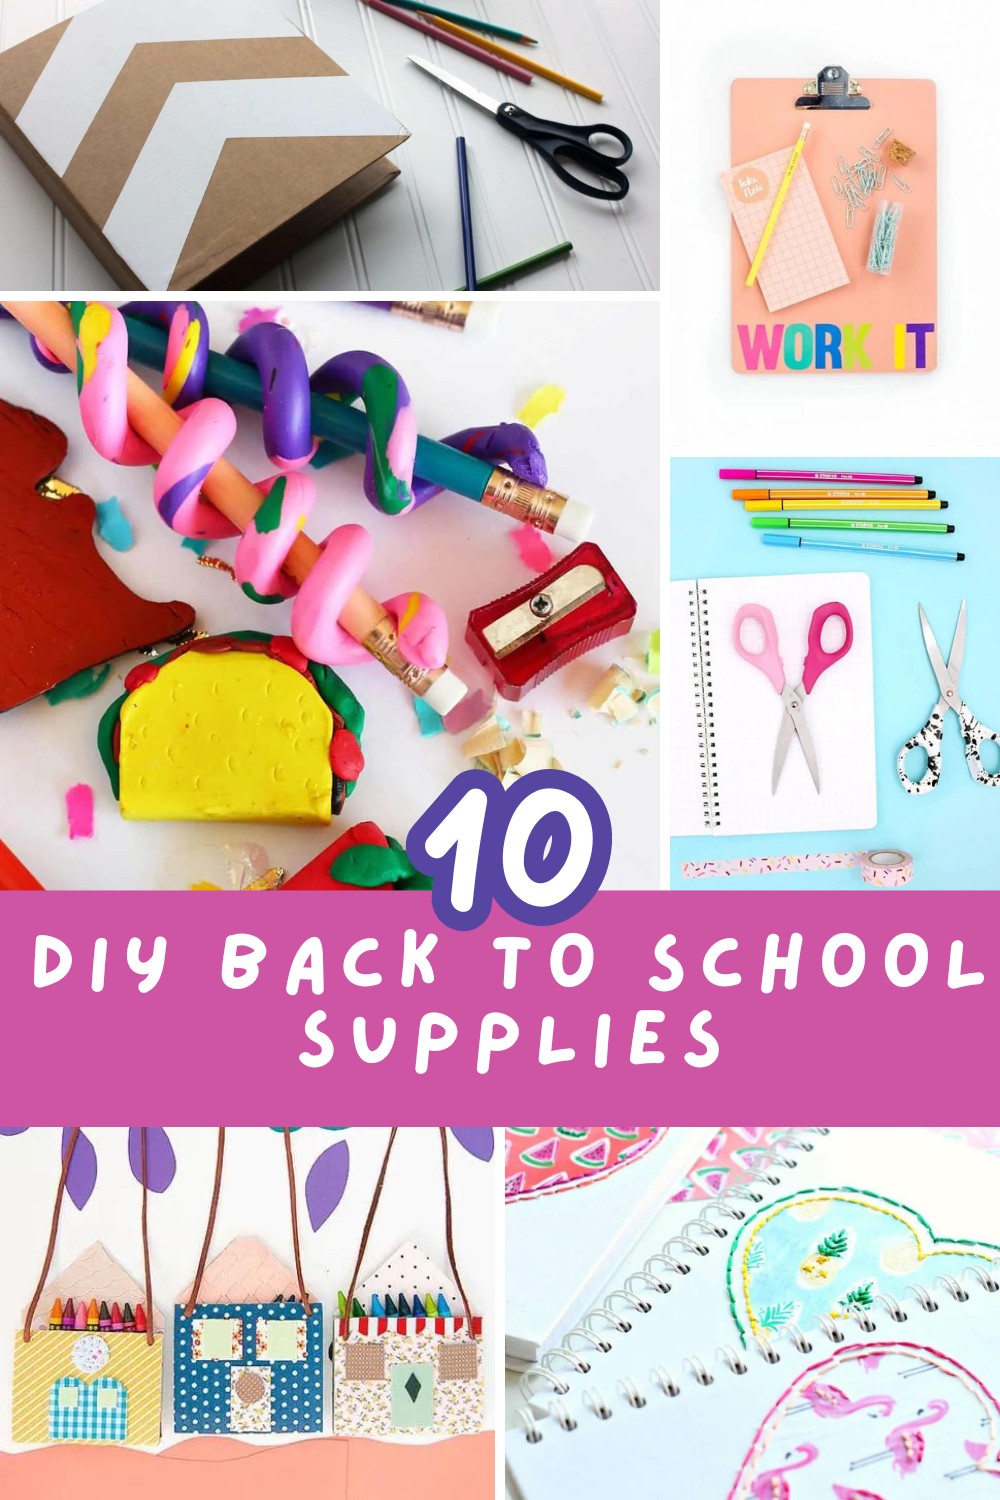 Get ready for school with these awesome DIY supplies! From custom notebooks and unique pencils to cool homemade erasers, your kids will be thrilled to make and use these creative projects. Perfect for adding a personal touch to their school gear! #DIYProjects #SchoolSupplies #BackToSchool